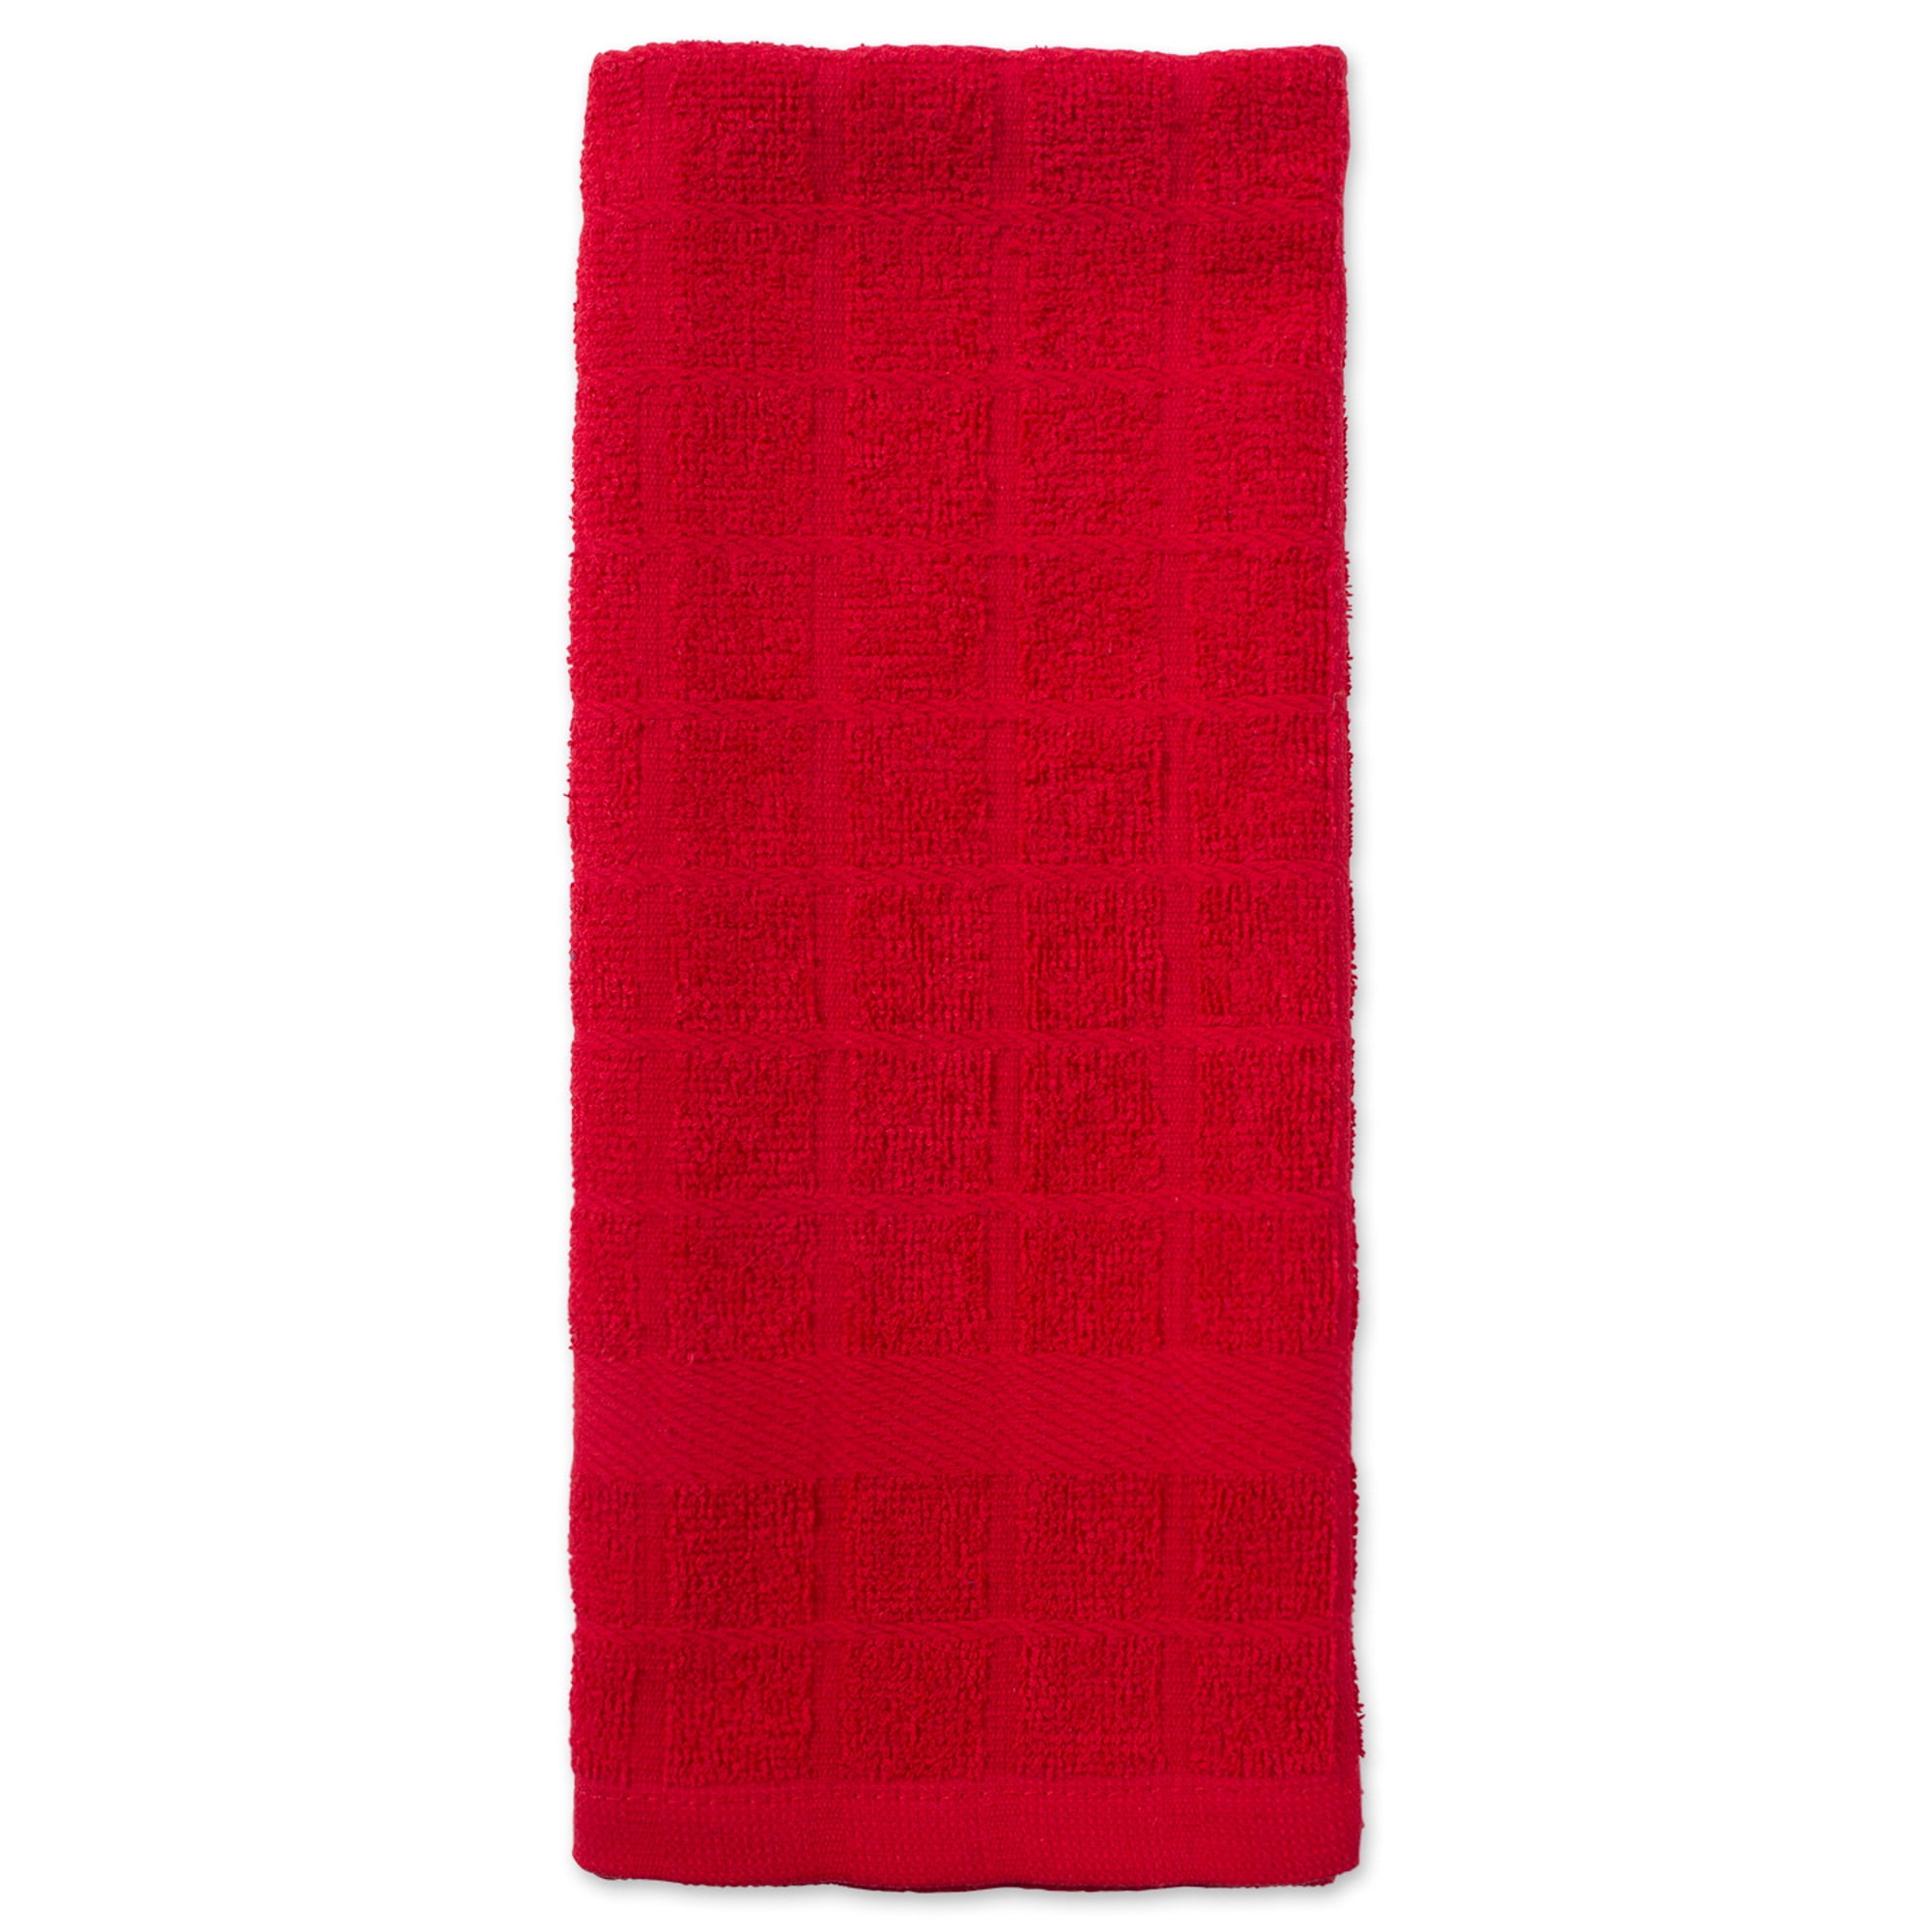 Contemporary Home Living Set of 3 Assorted Black and Red Dish Towel, 30